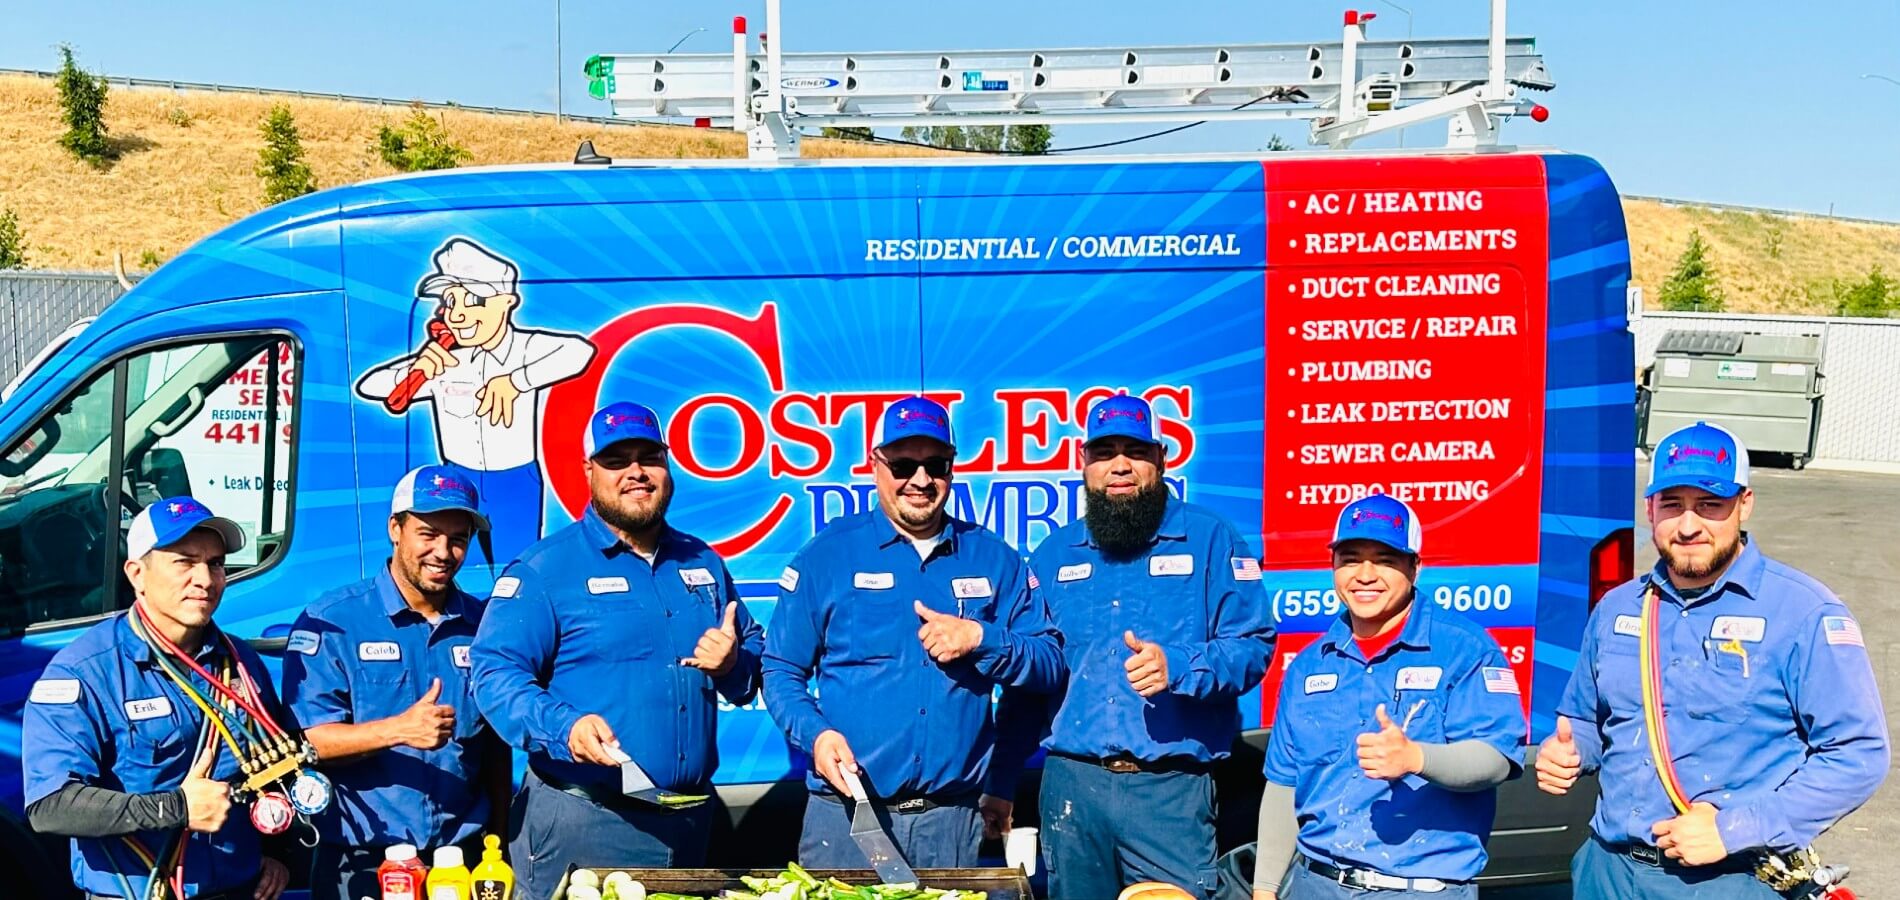 Costless Plumbing workers in a group